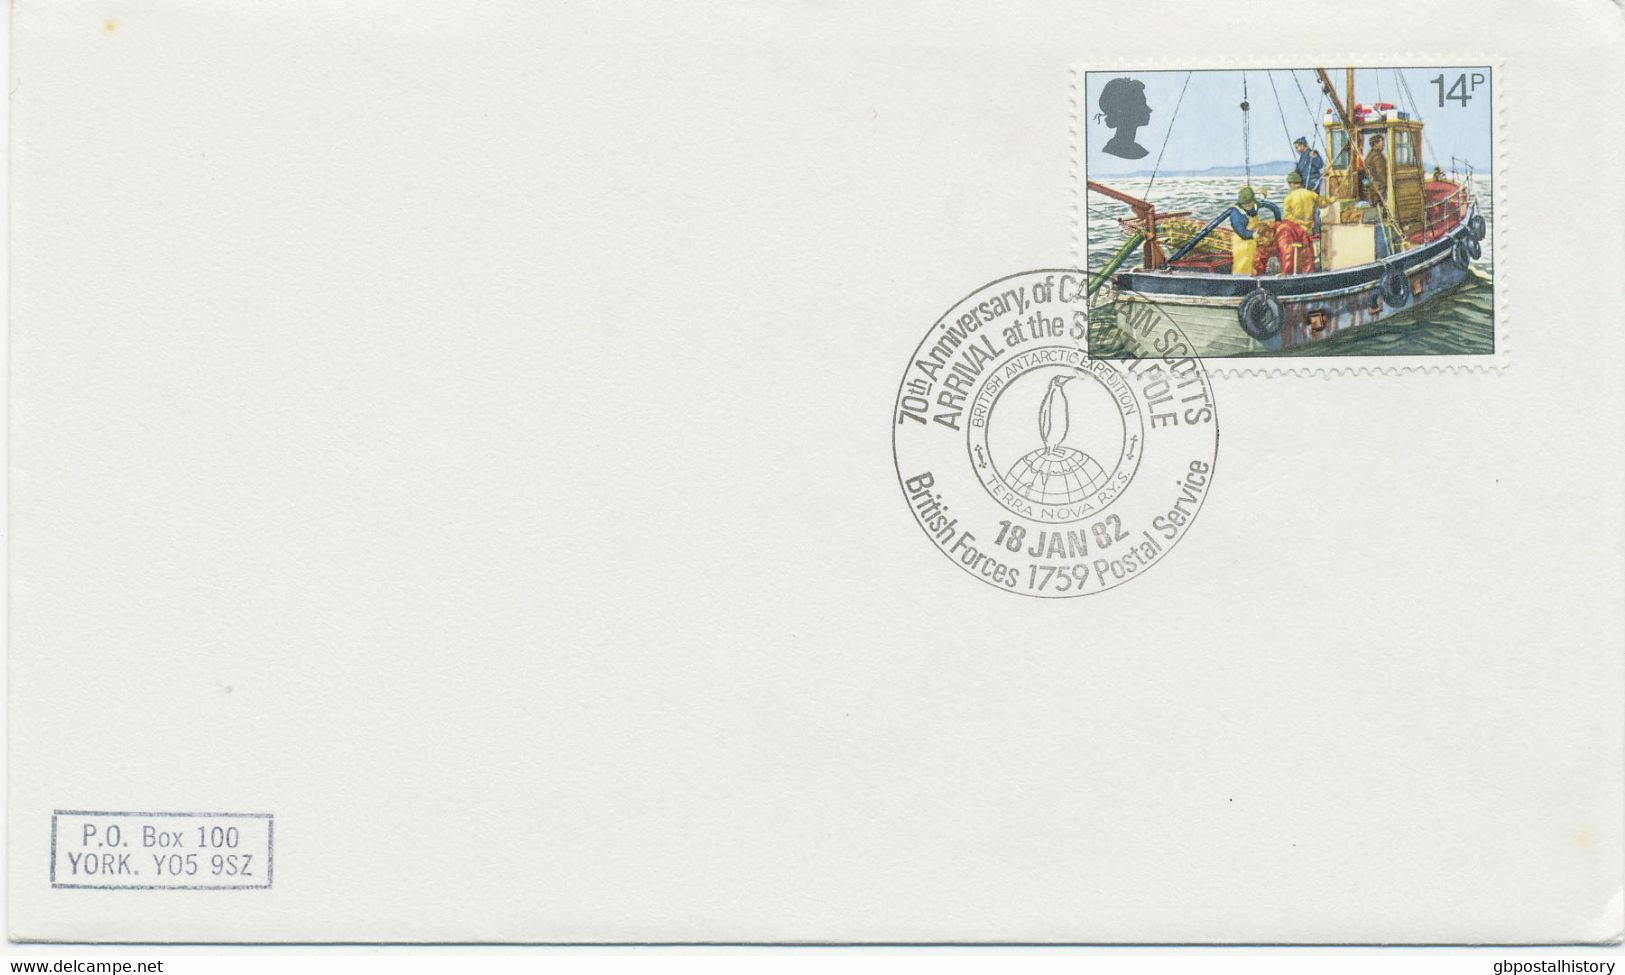 GB SPECIAL EVENT POSTMARKS 70th Anniversary Of CAPTAIN SCOTT'S ARRIVAL At The SOUTHPOLE - BRITISH ANTARCTIC EXPEDITION - Postmark Collection